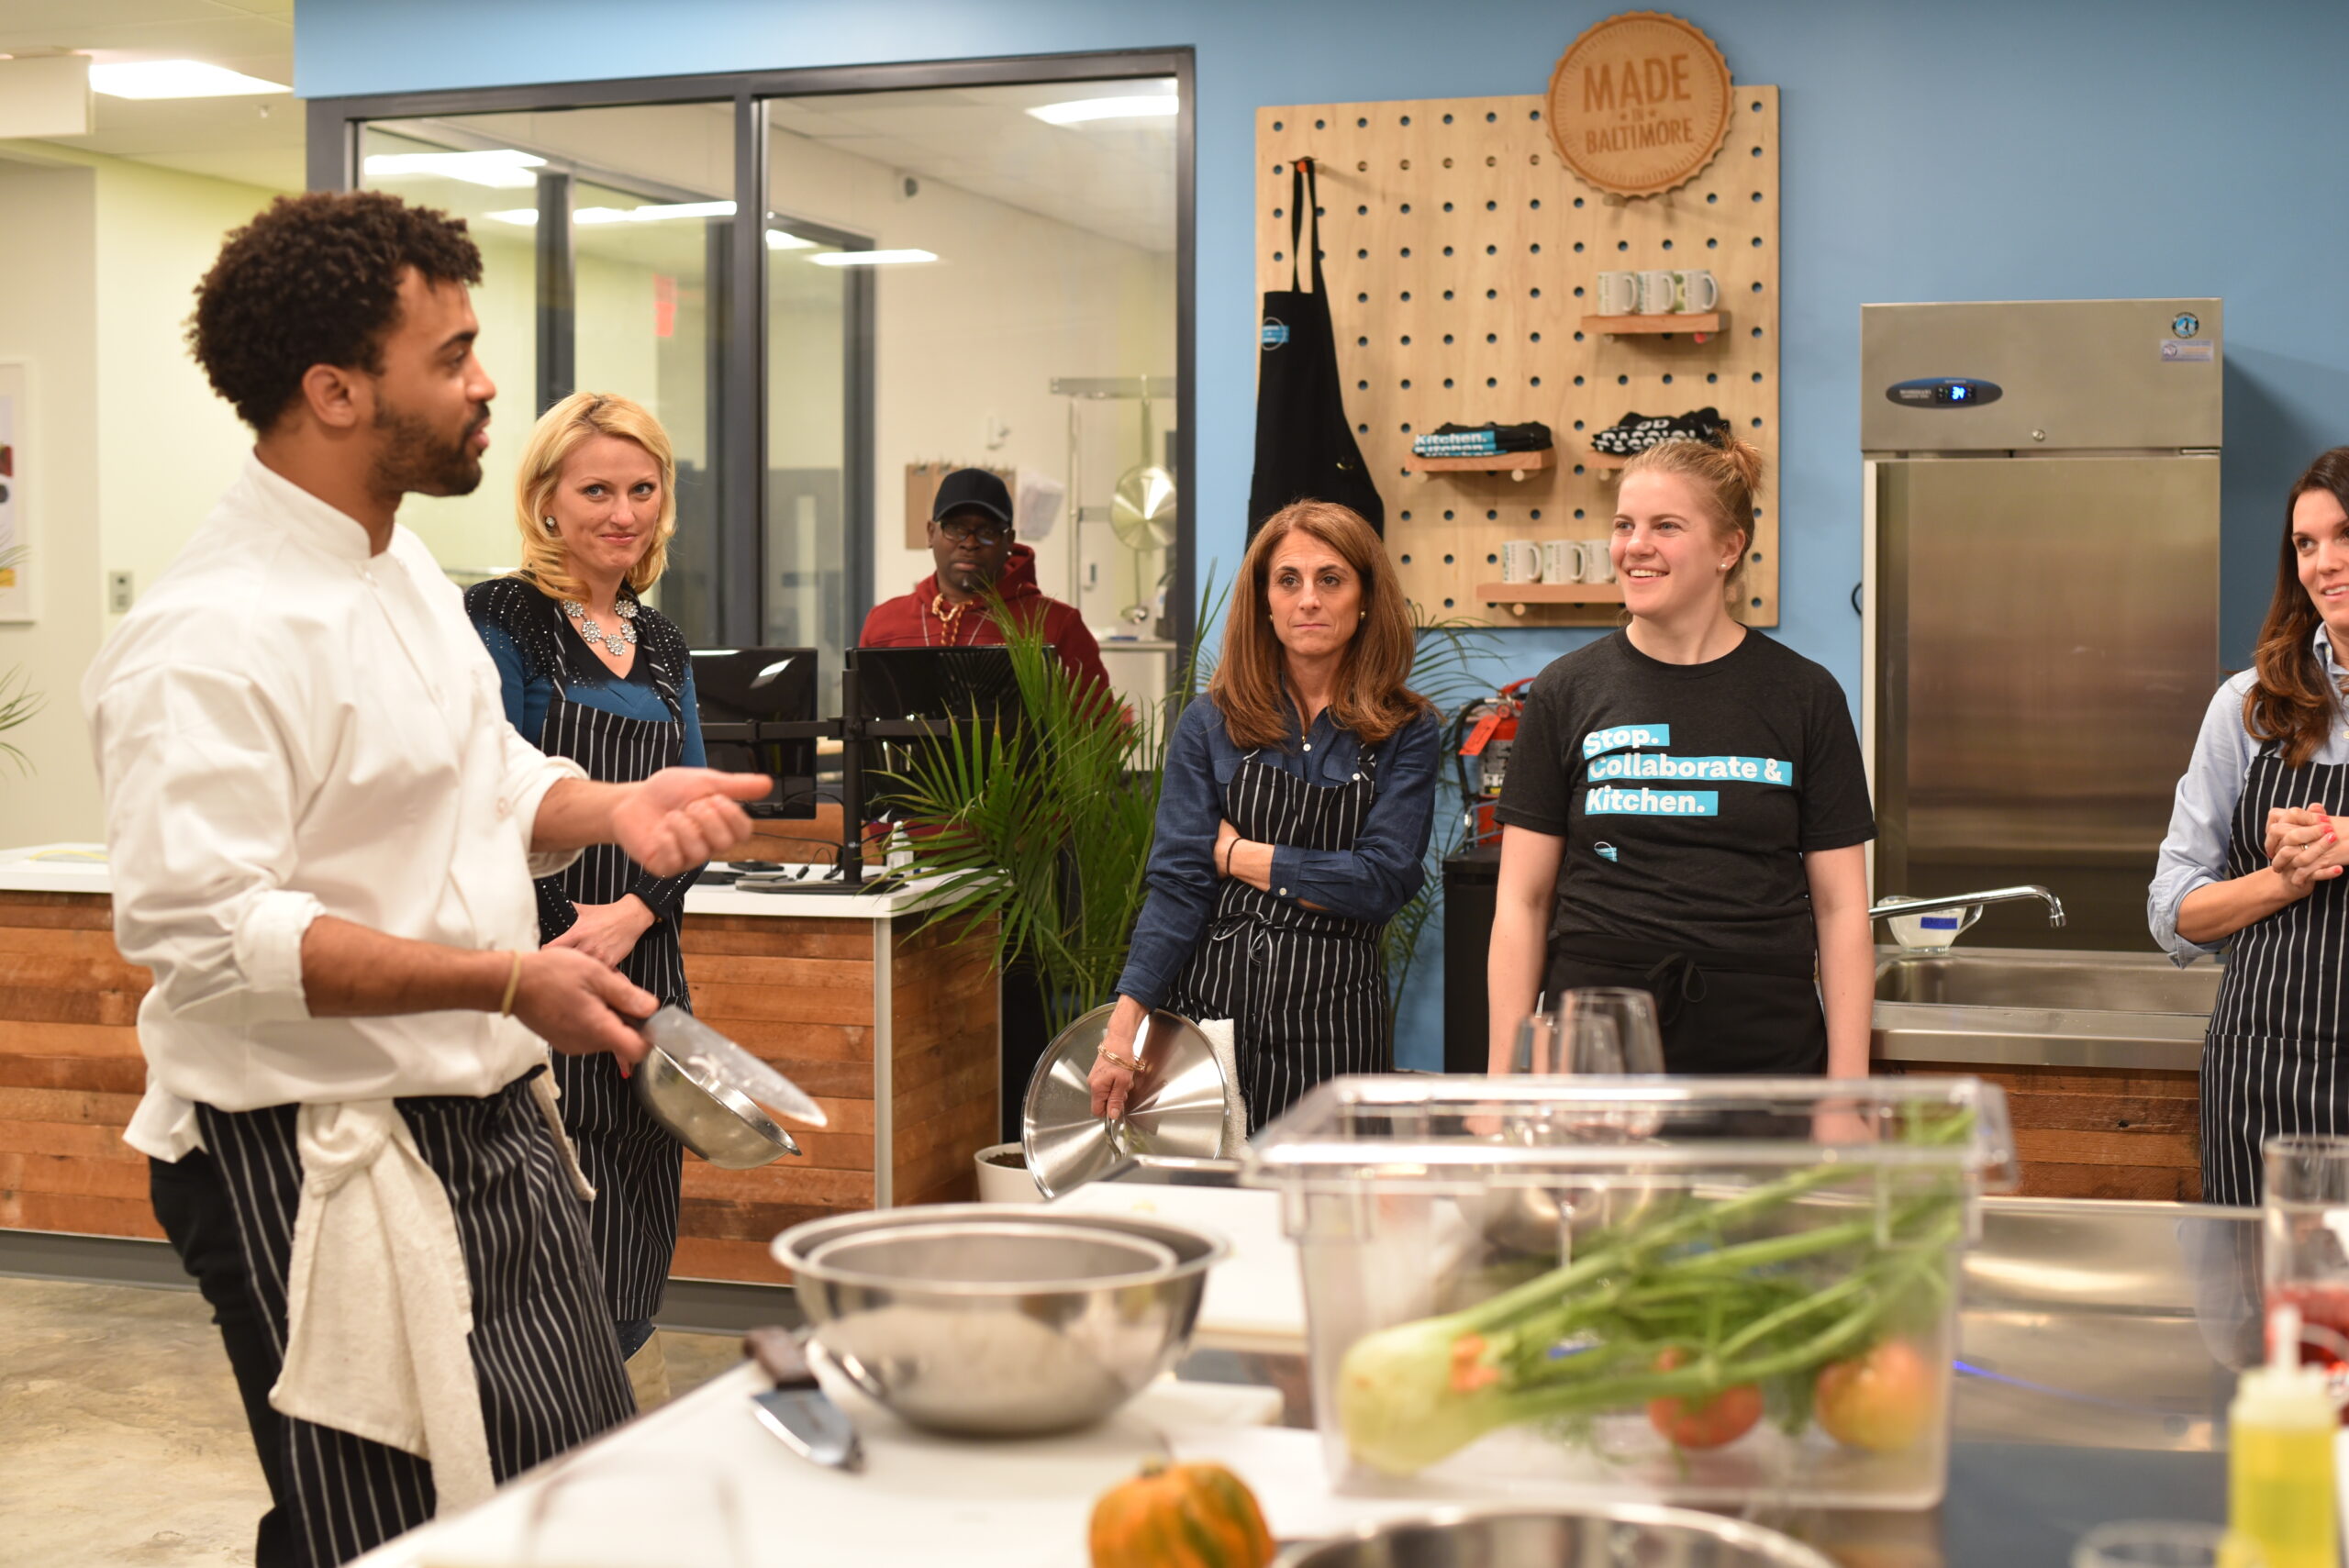 School of Food Launches New Culinary Classes & Website